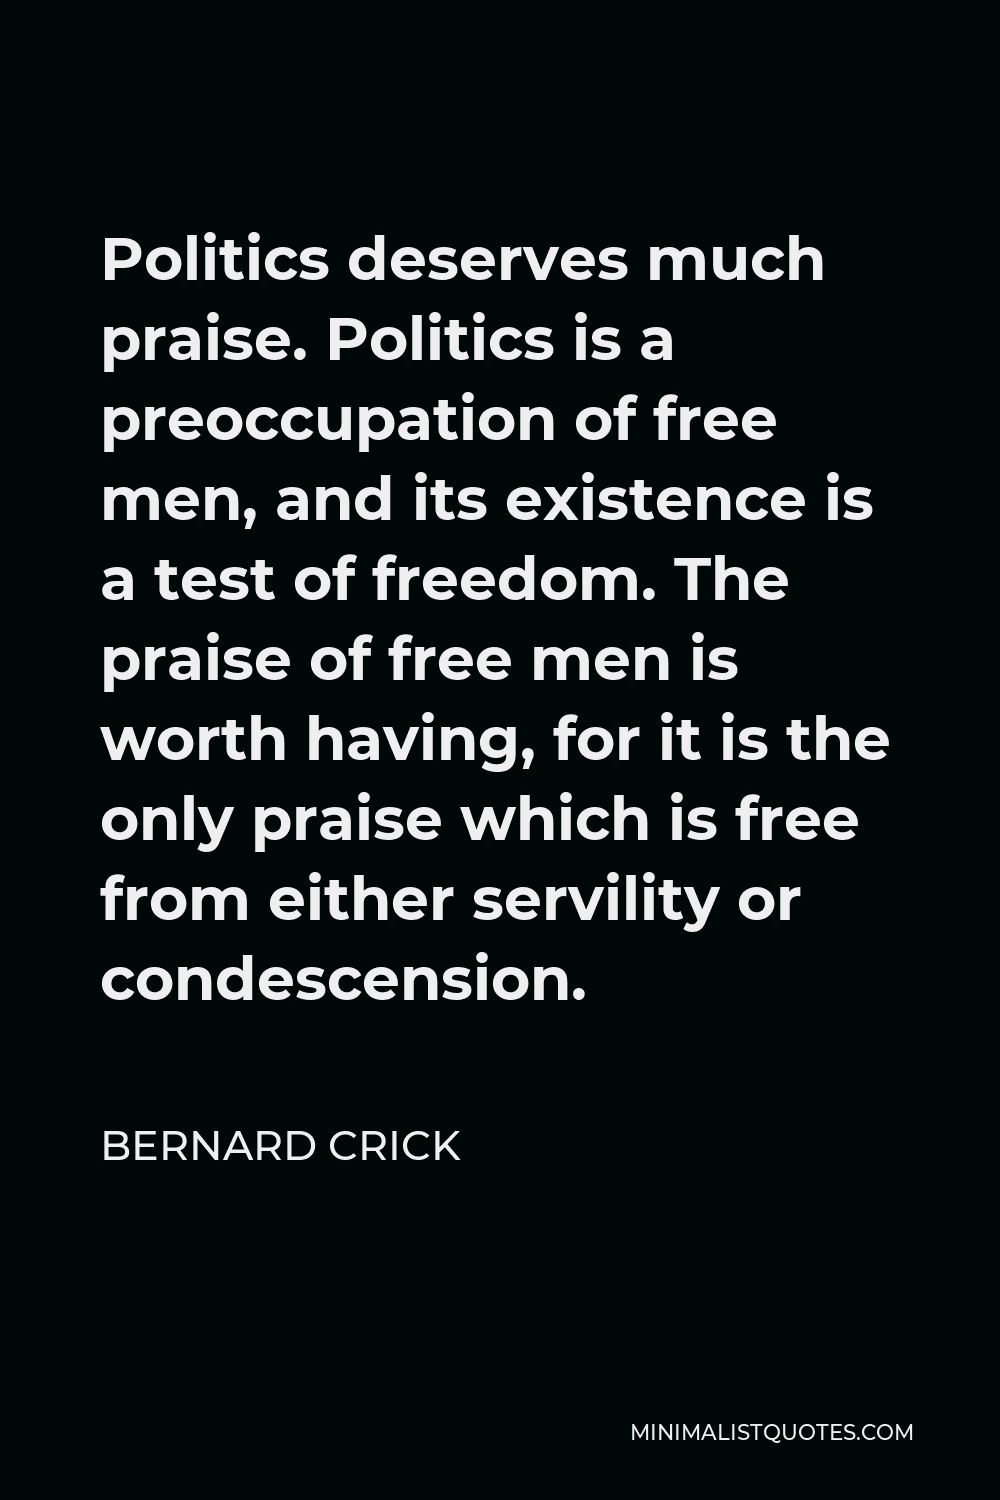 Bernard Crick Quote - Politics deserves much praise. Politics is a preoccupation of free men, and its existence is a test of freedom. The praise of free men is worth having, for it is the only praise which is free from either servility or condescension.